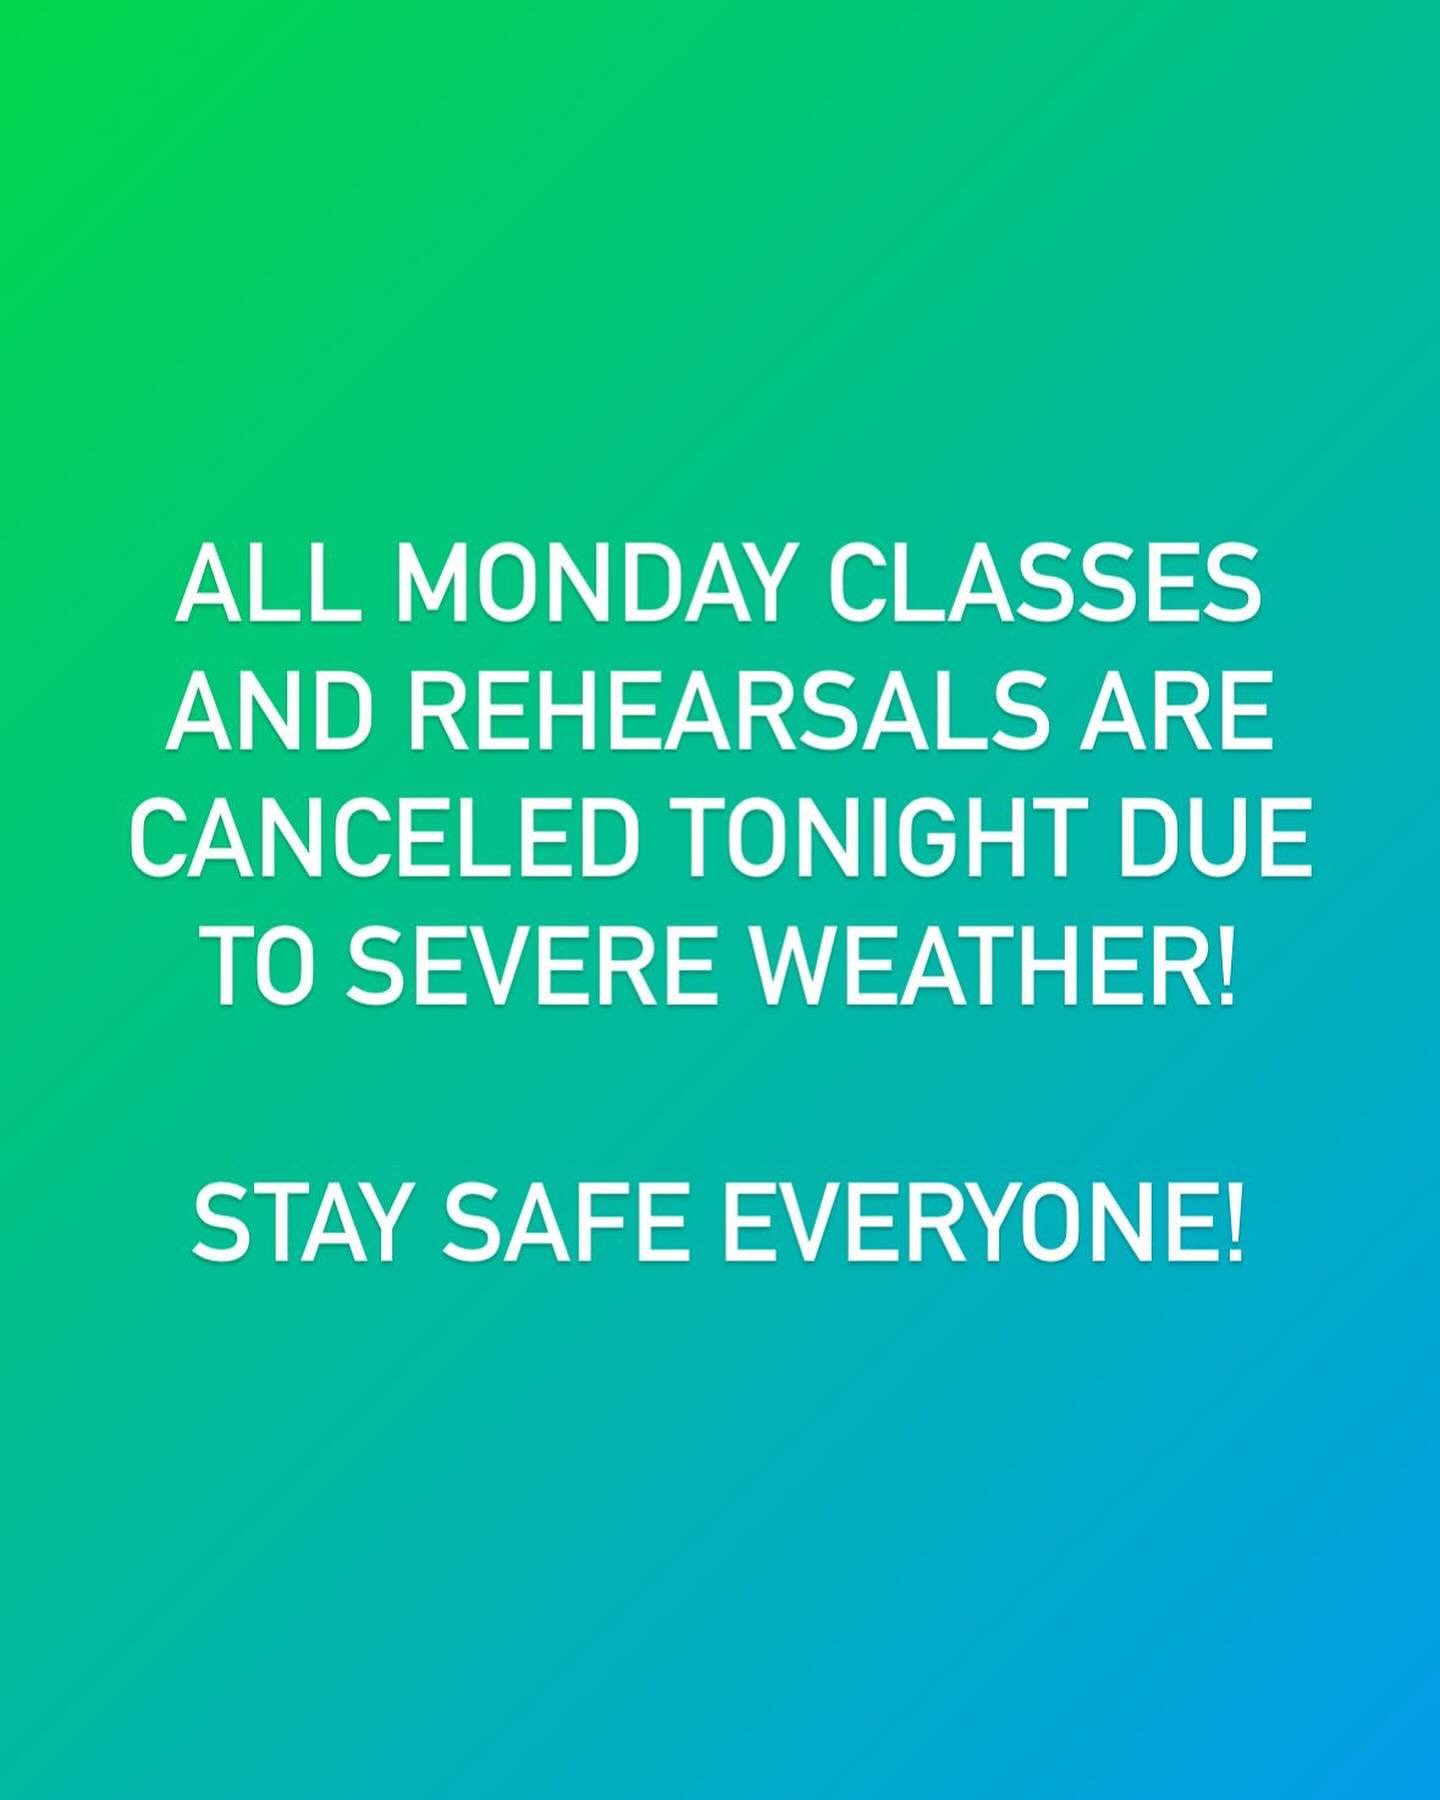 🚨Baila Wichita is closed this evening!🚨
Stay safe everyone!